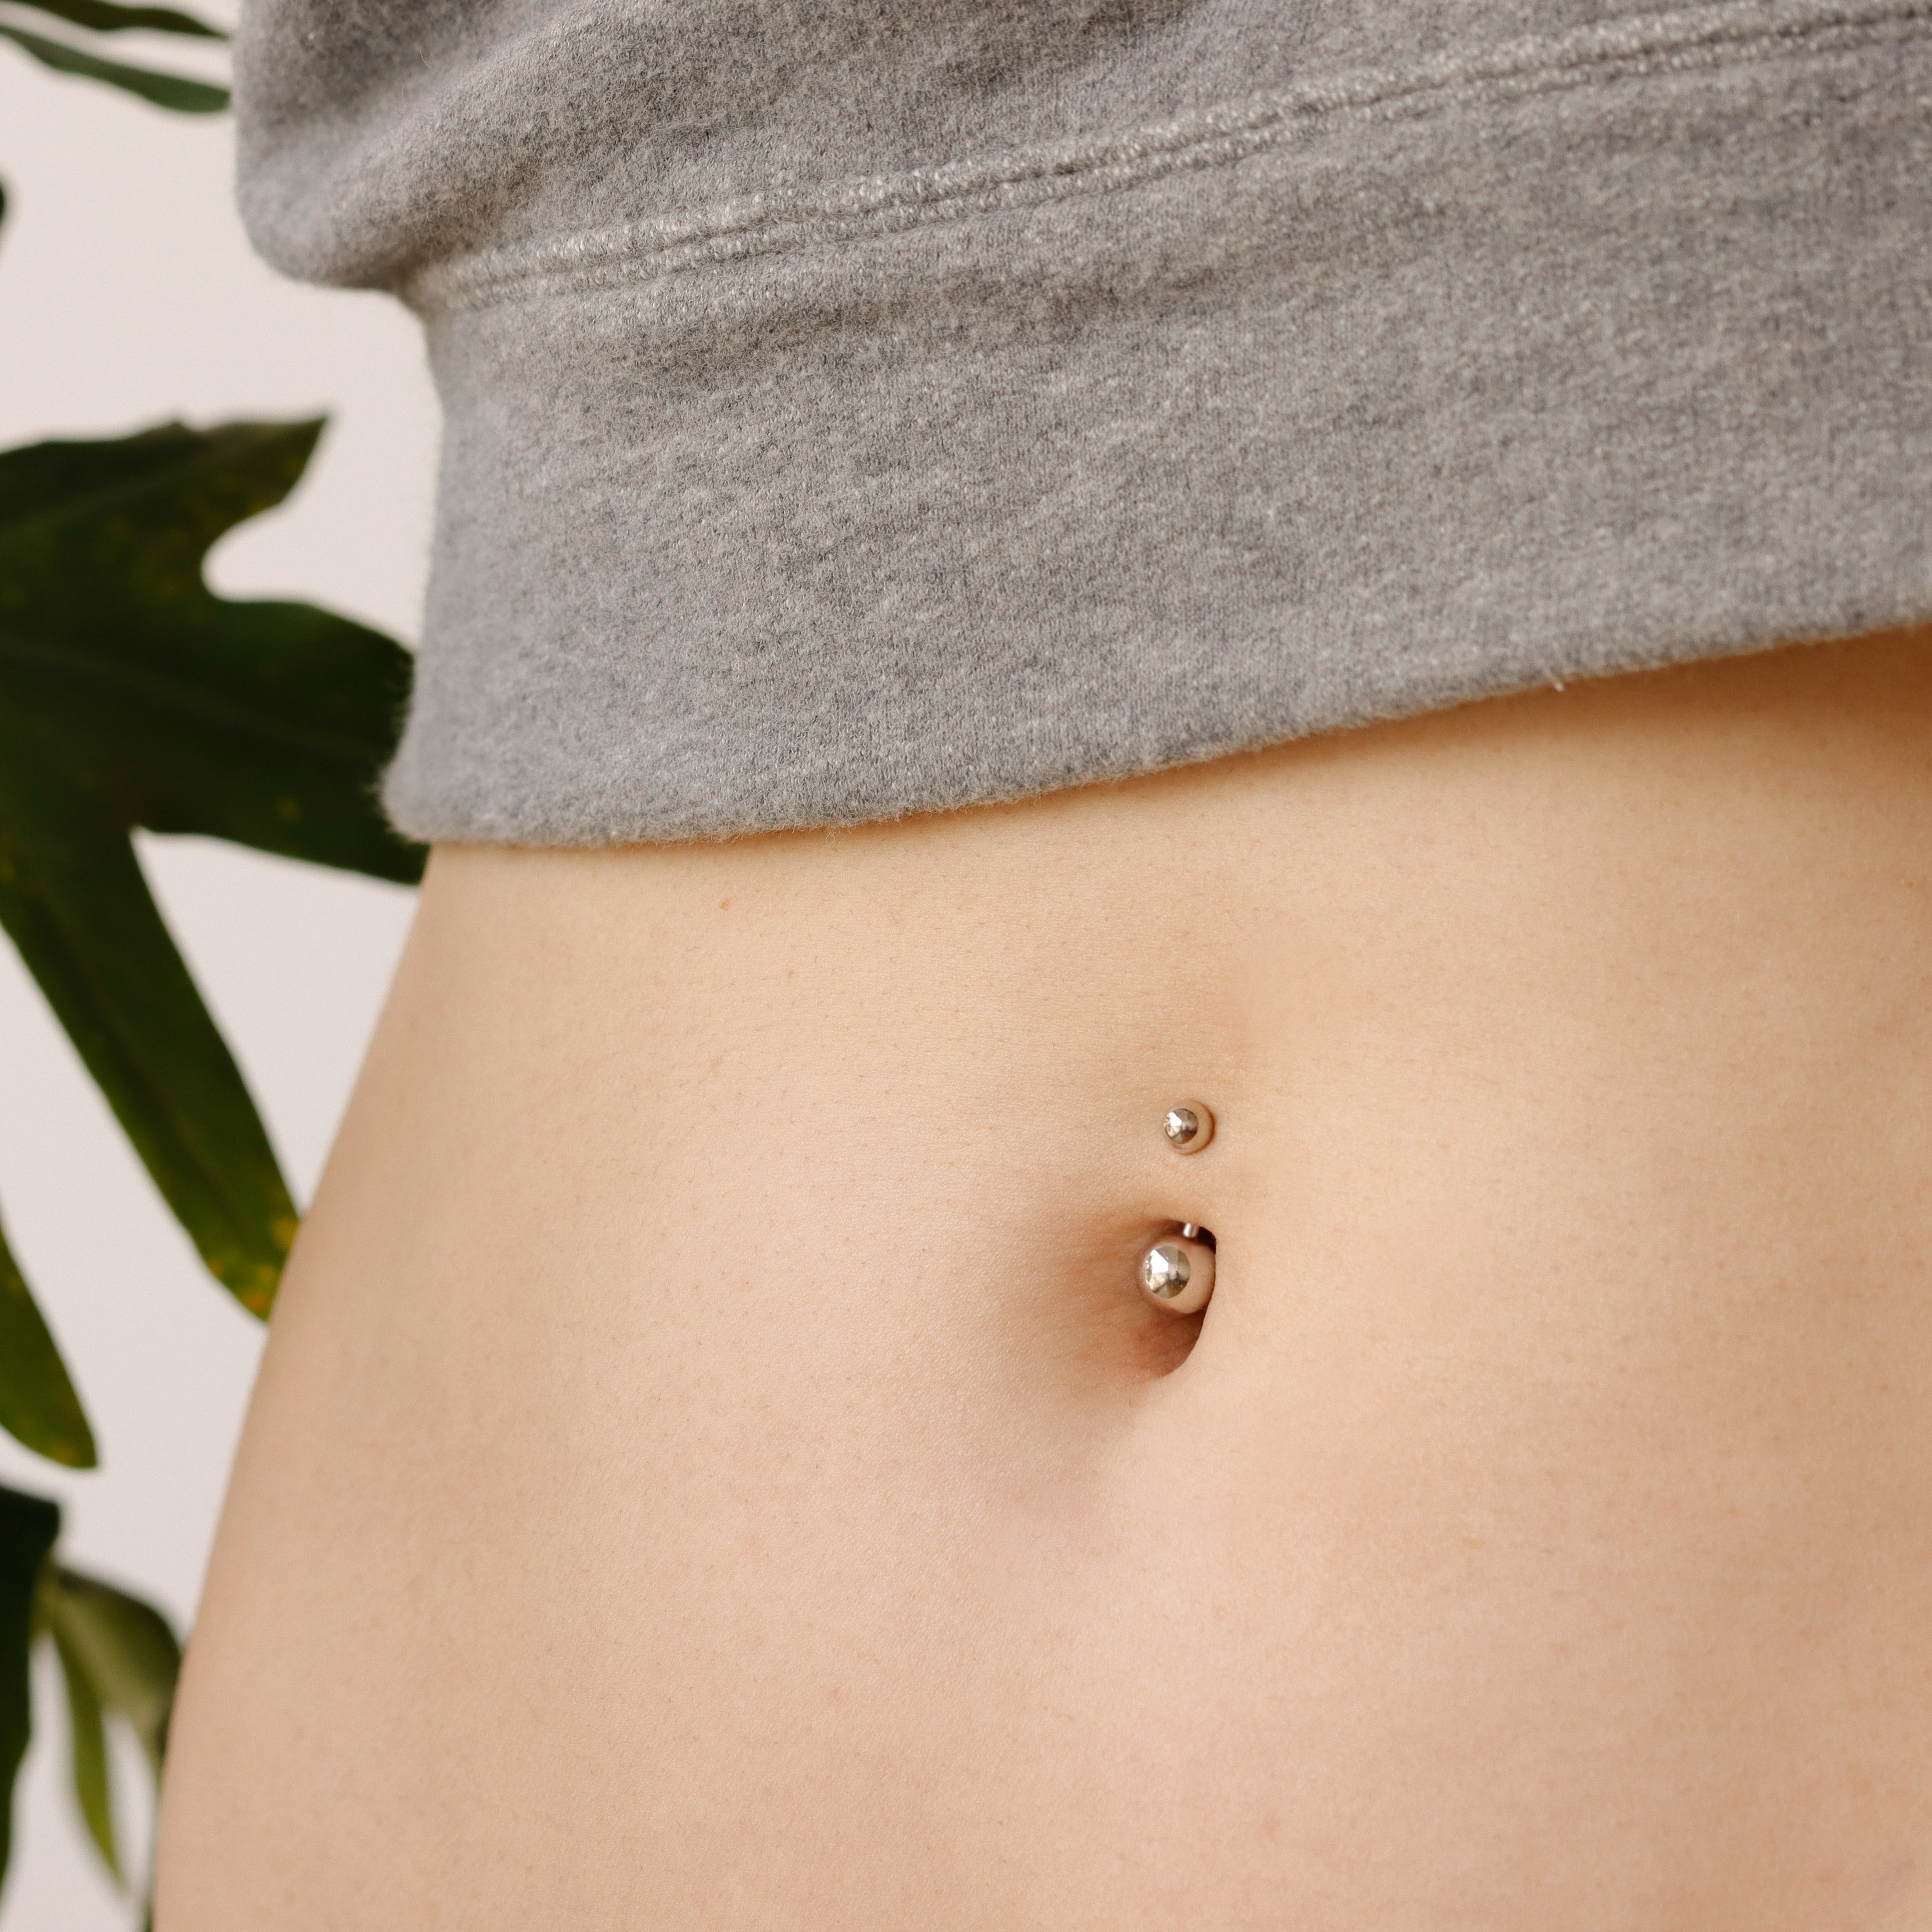 Belly Button Piercings made of Solid Sterling Silver – Sturdy South